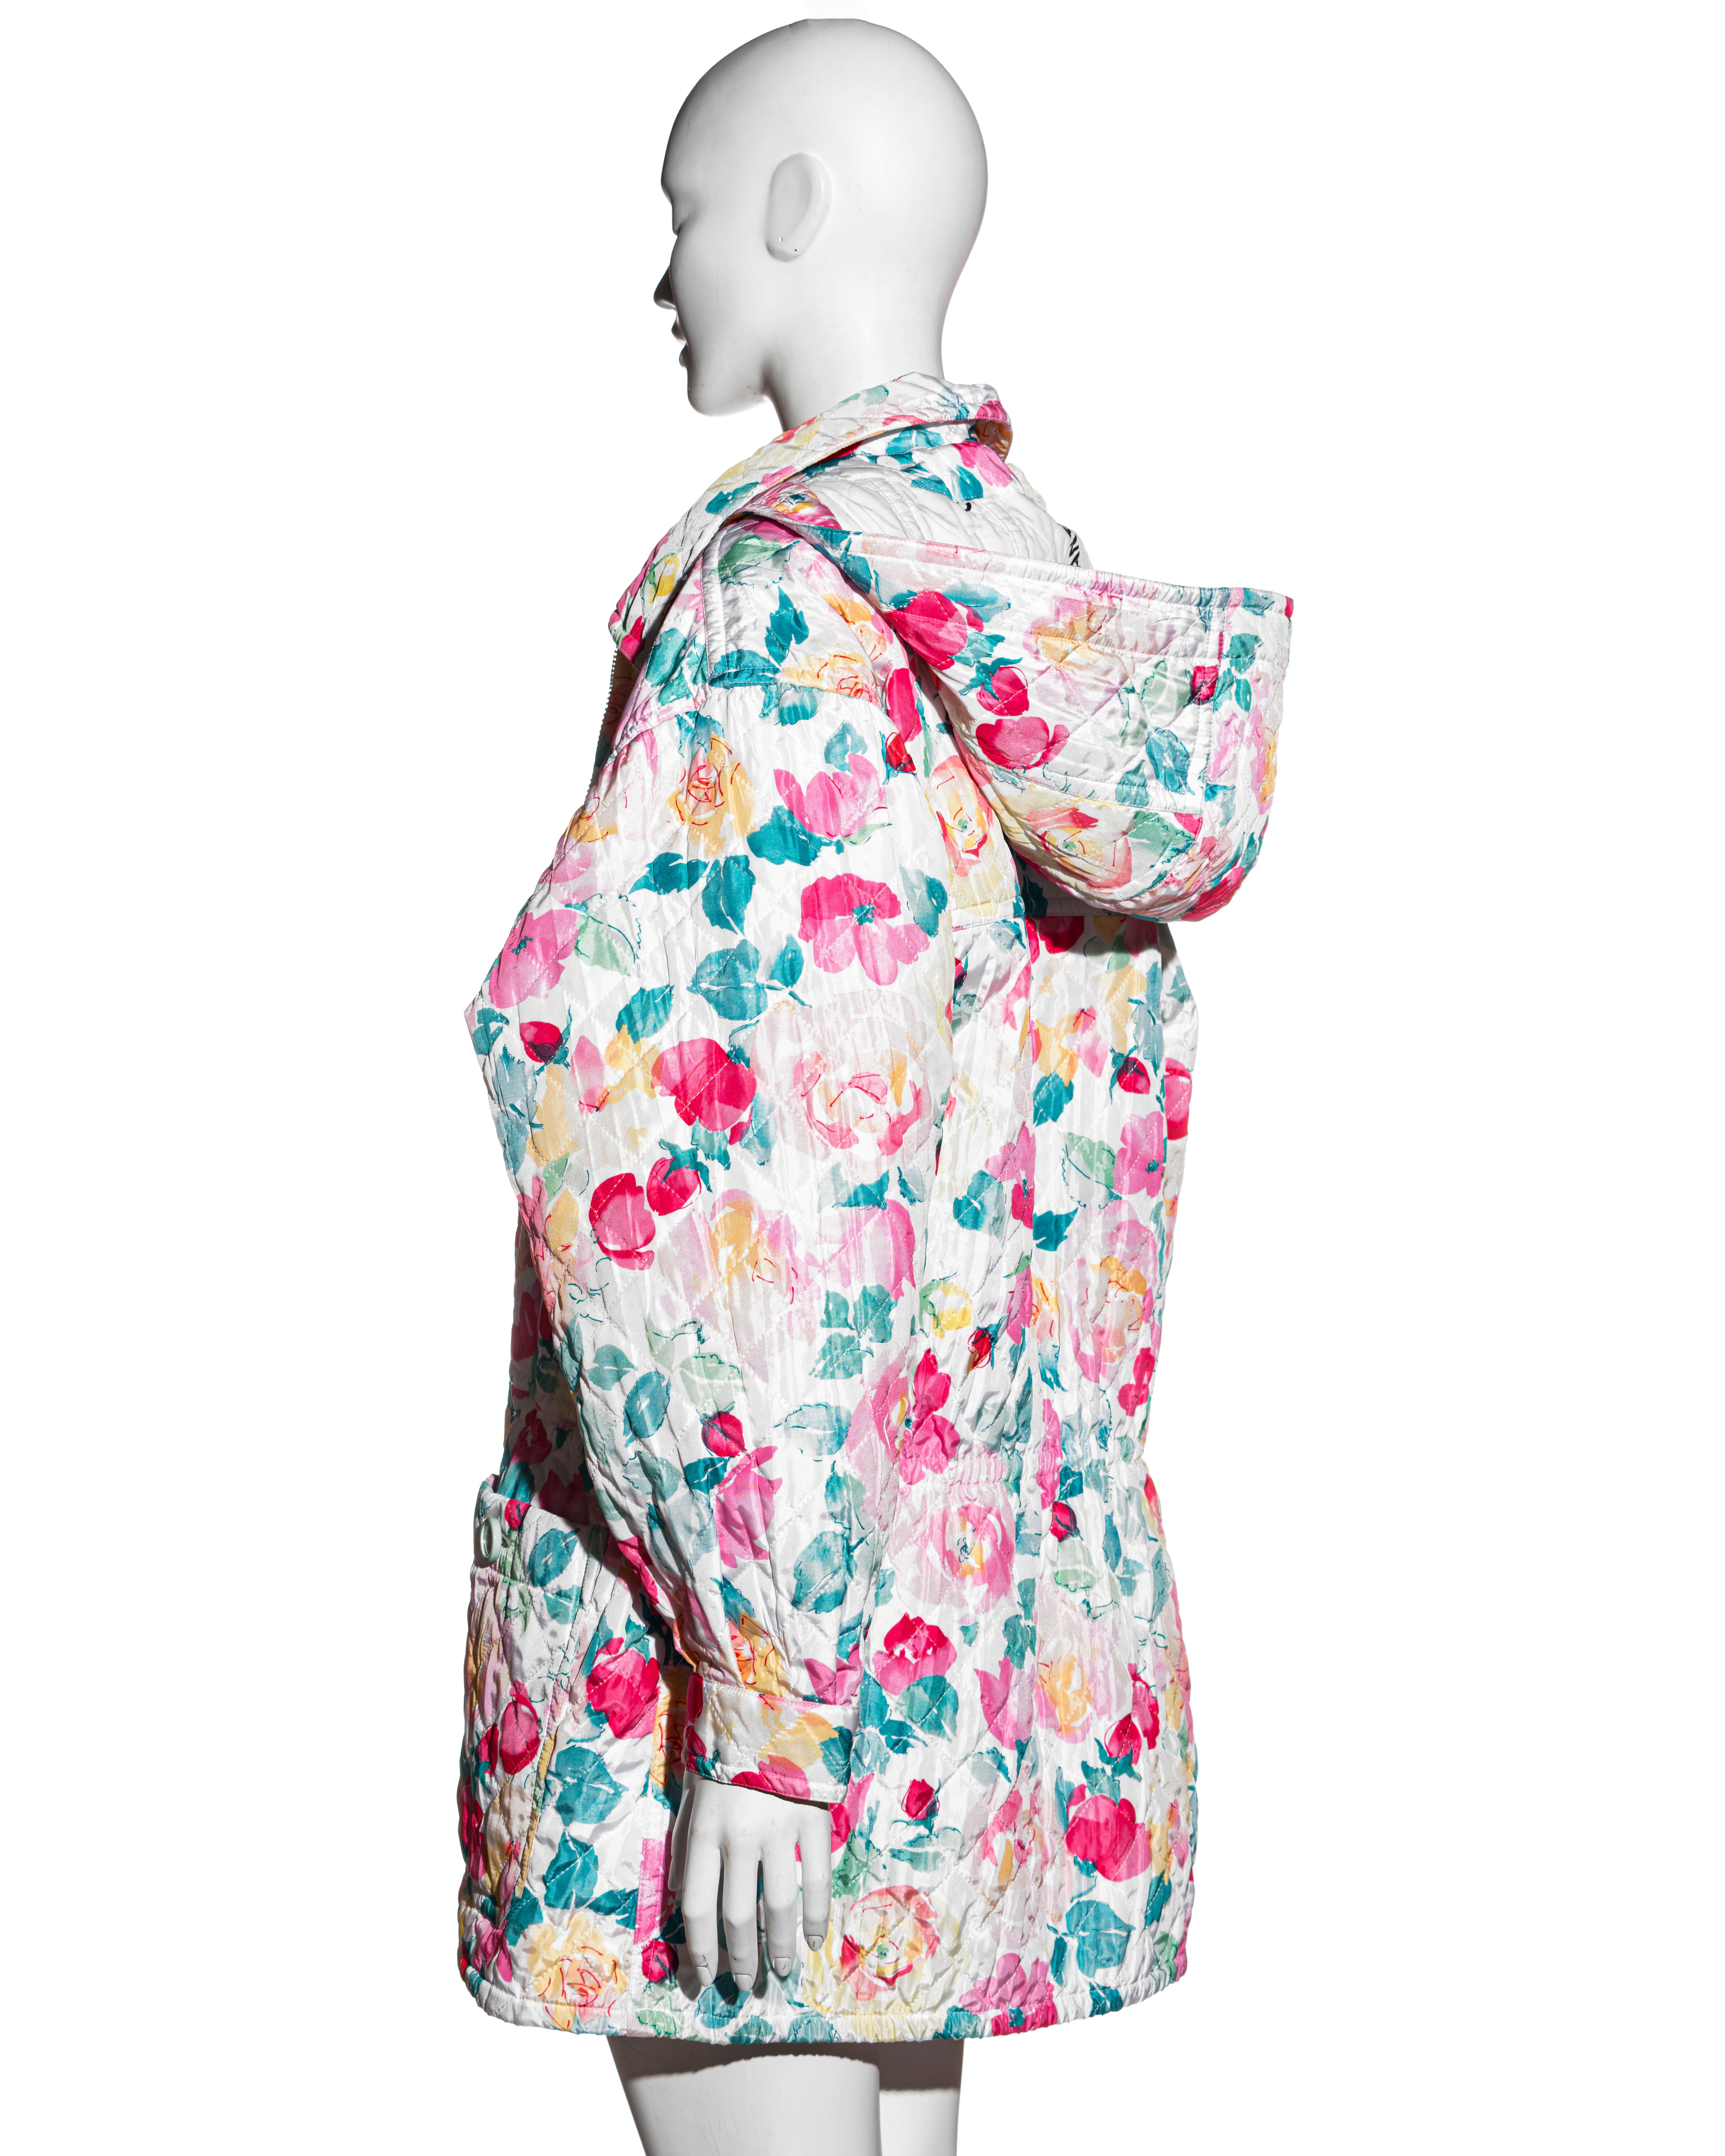 Chanel by Karl Lagerfeld pink rose print quilted playsuit and coat set, c 1994 2